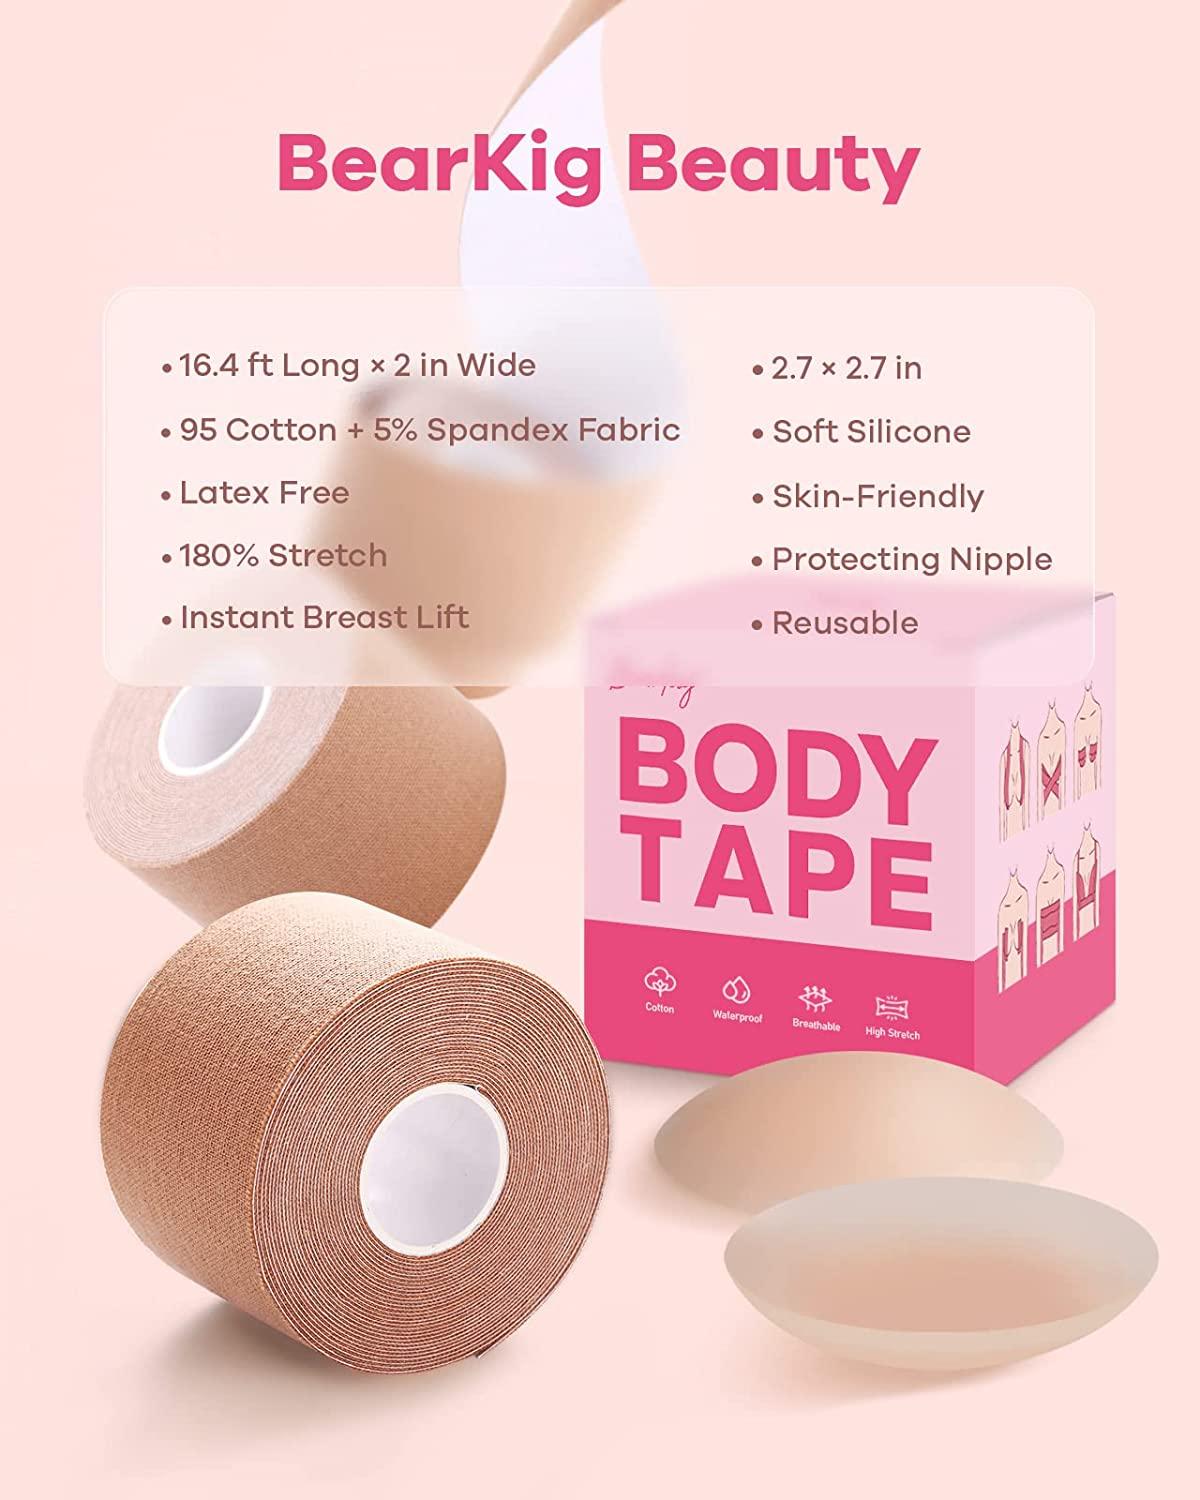 Boob Tape, Breast Lift Tape for A-E Cup Large Breast, Breathable